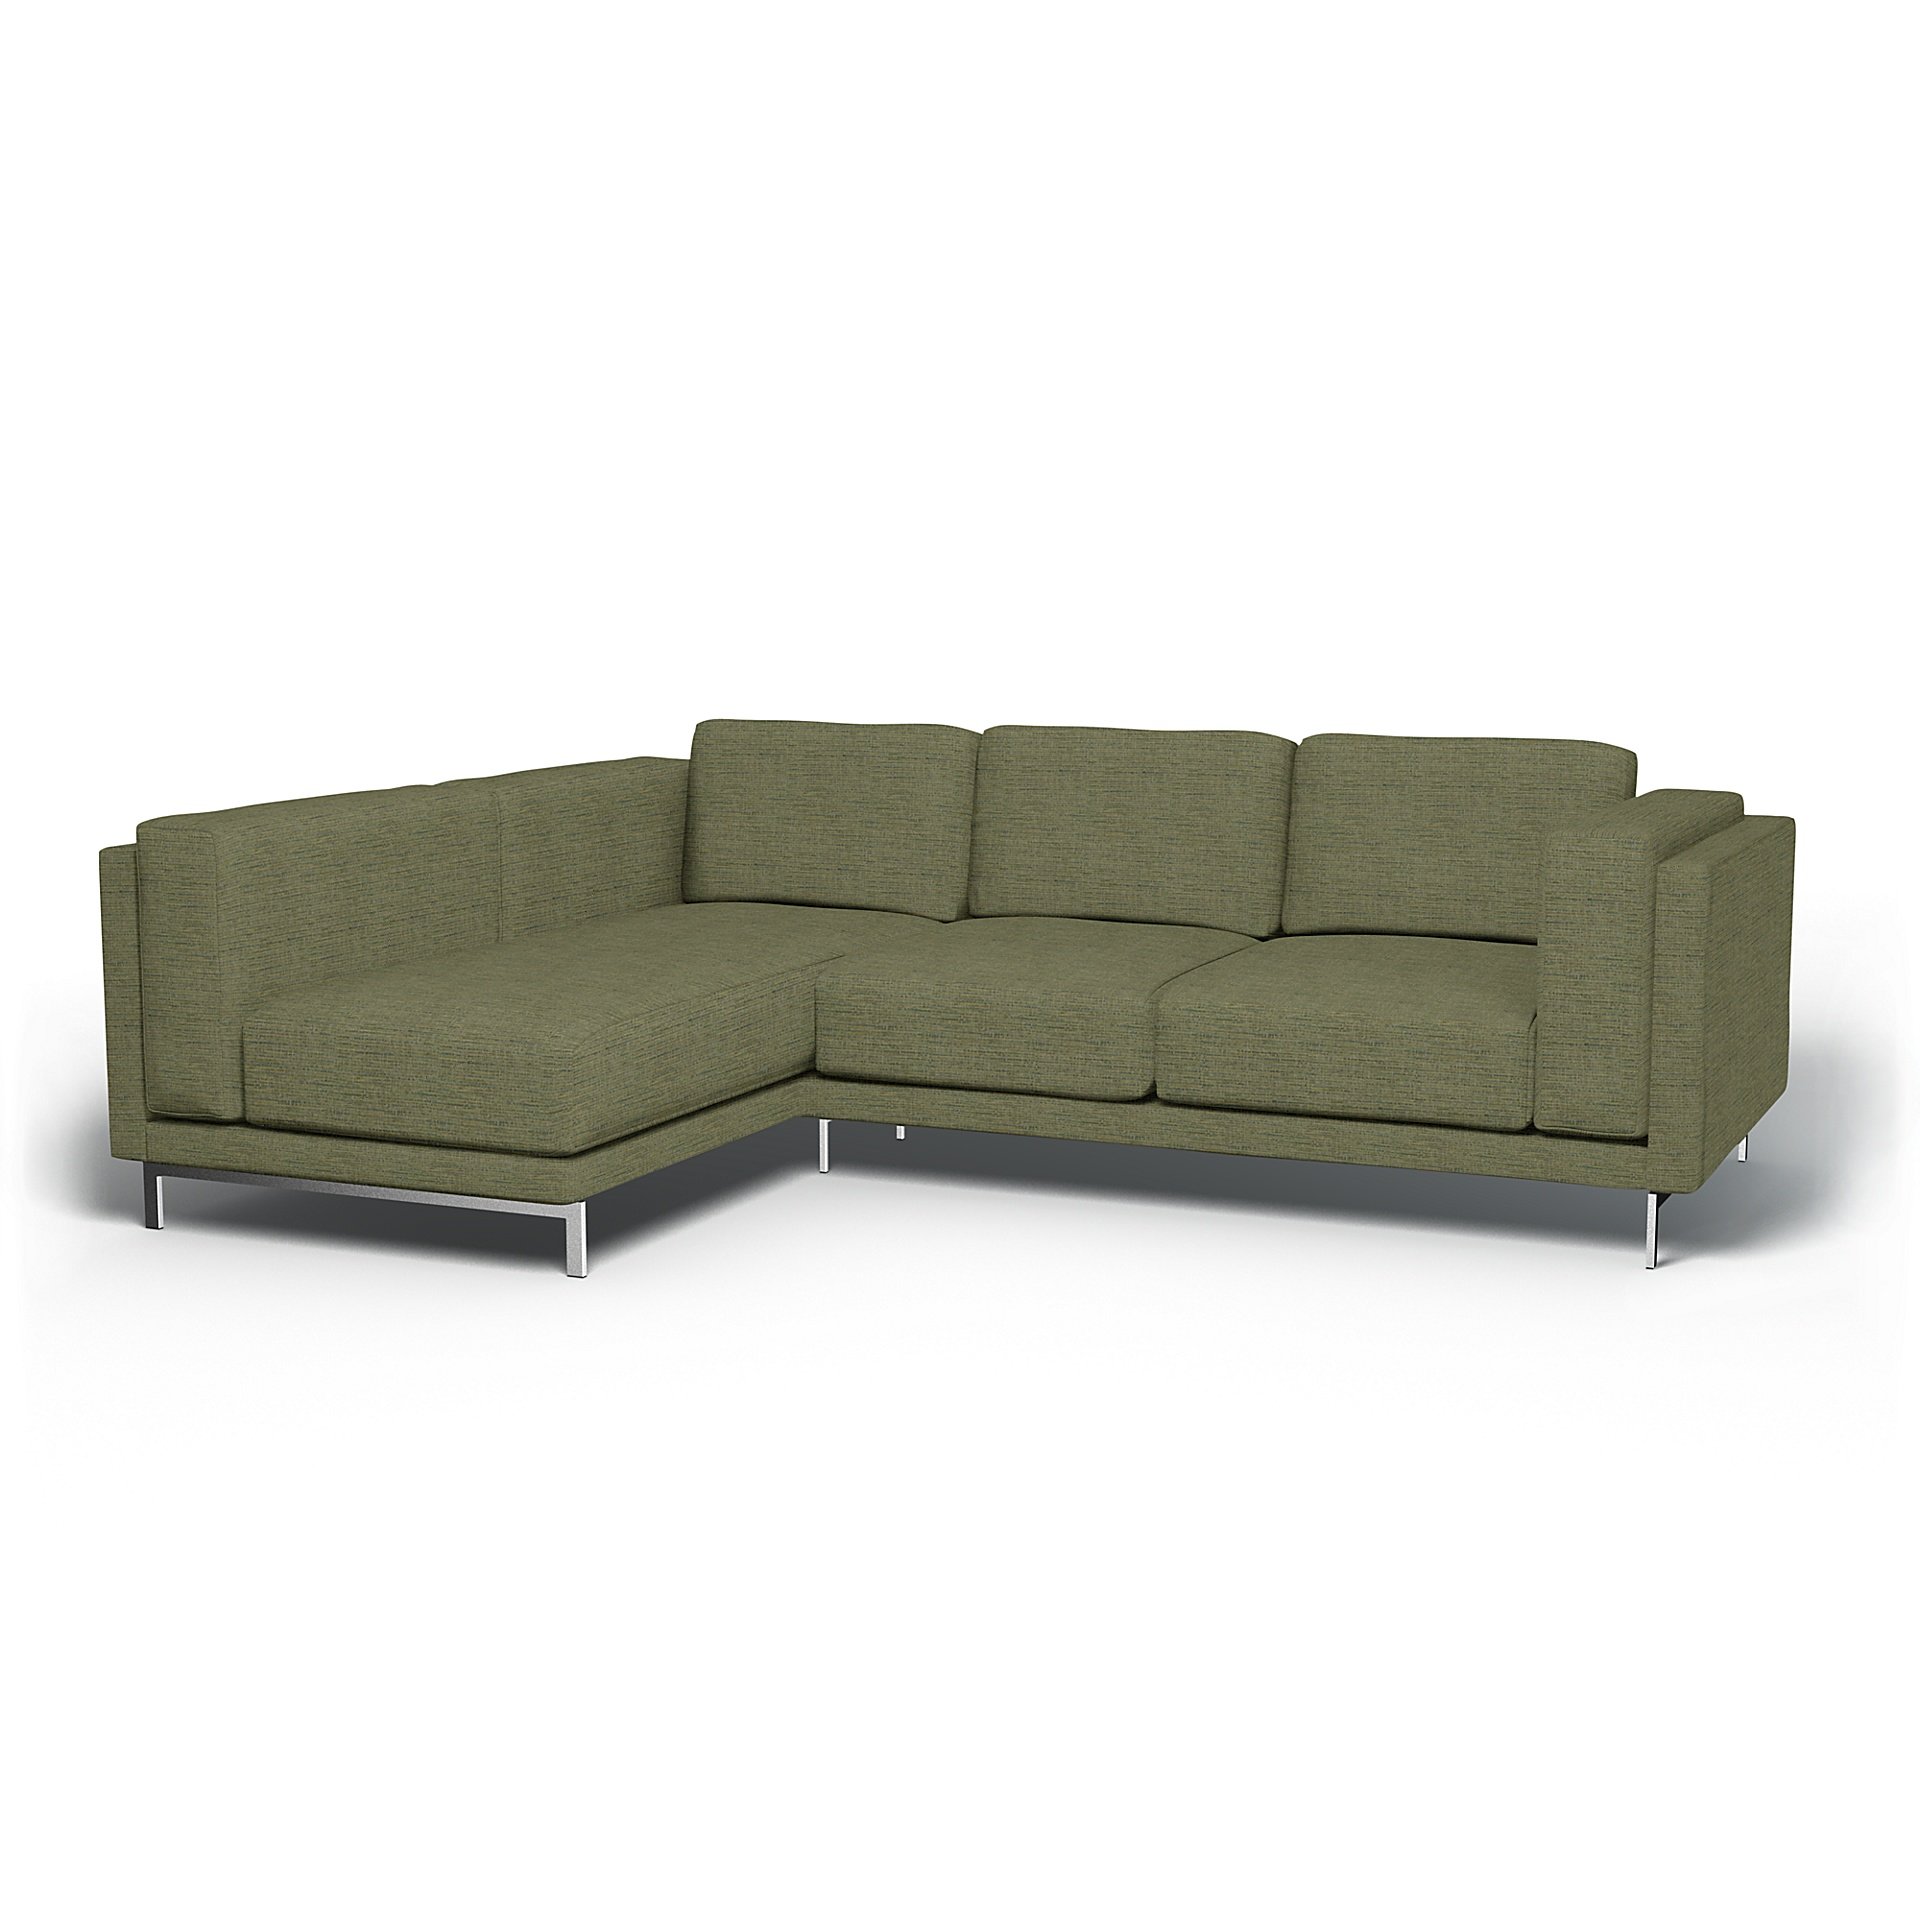 IKEA - Nockeby 3 Seater Sofa with Left Chaise Cover, Meadow Green, Boucle & Texture - Bemz